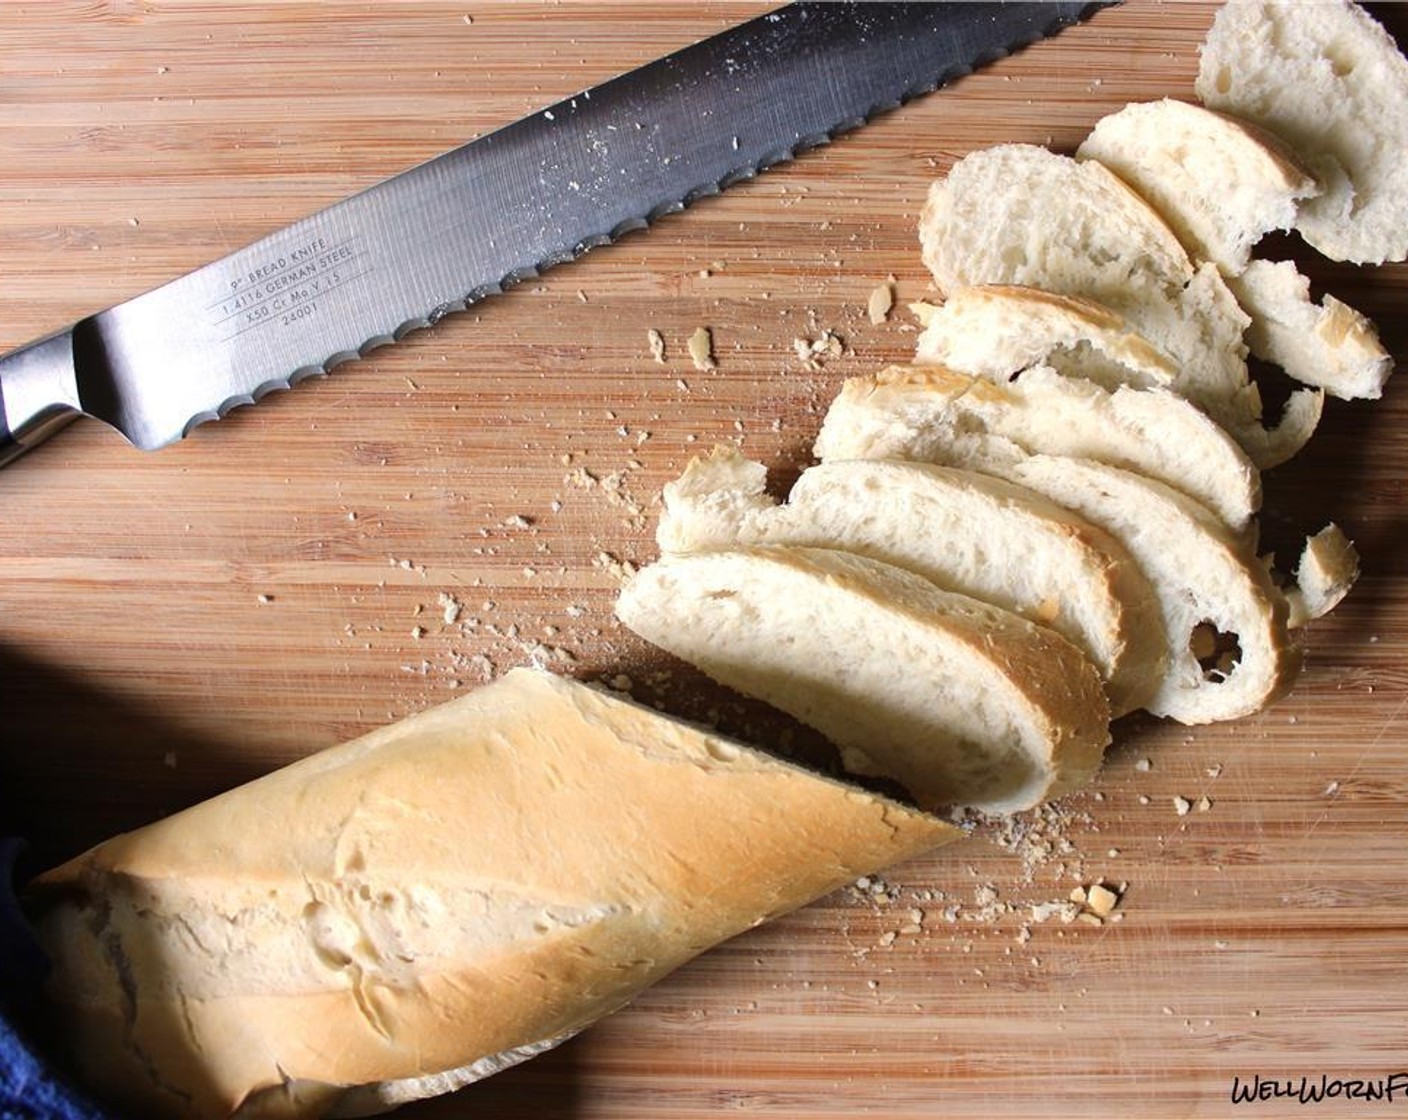 step 4 Cut ¼-inch slices of the Baguette (1) and place in the oven on broil for a minute on each side.